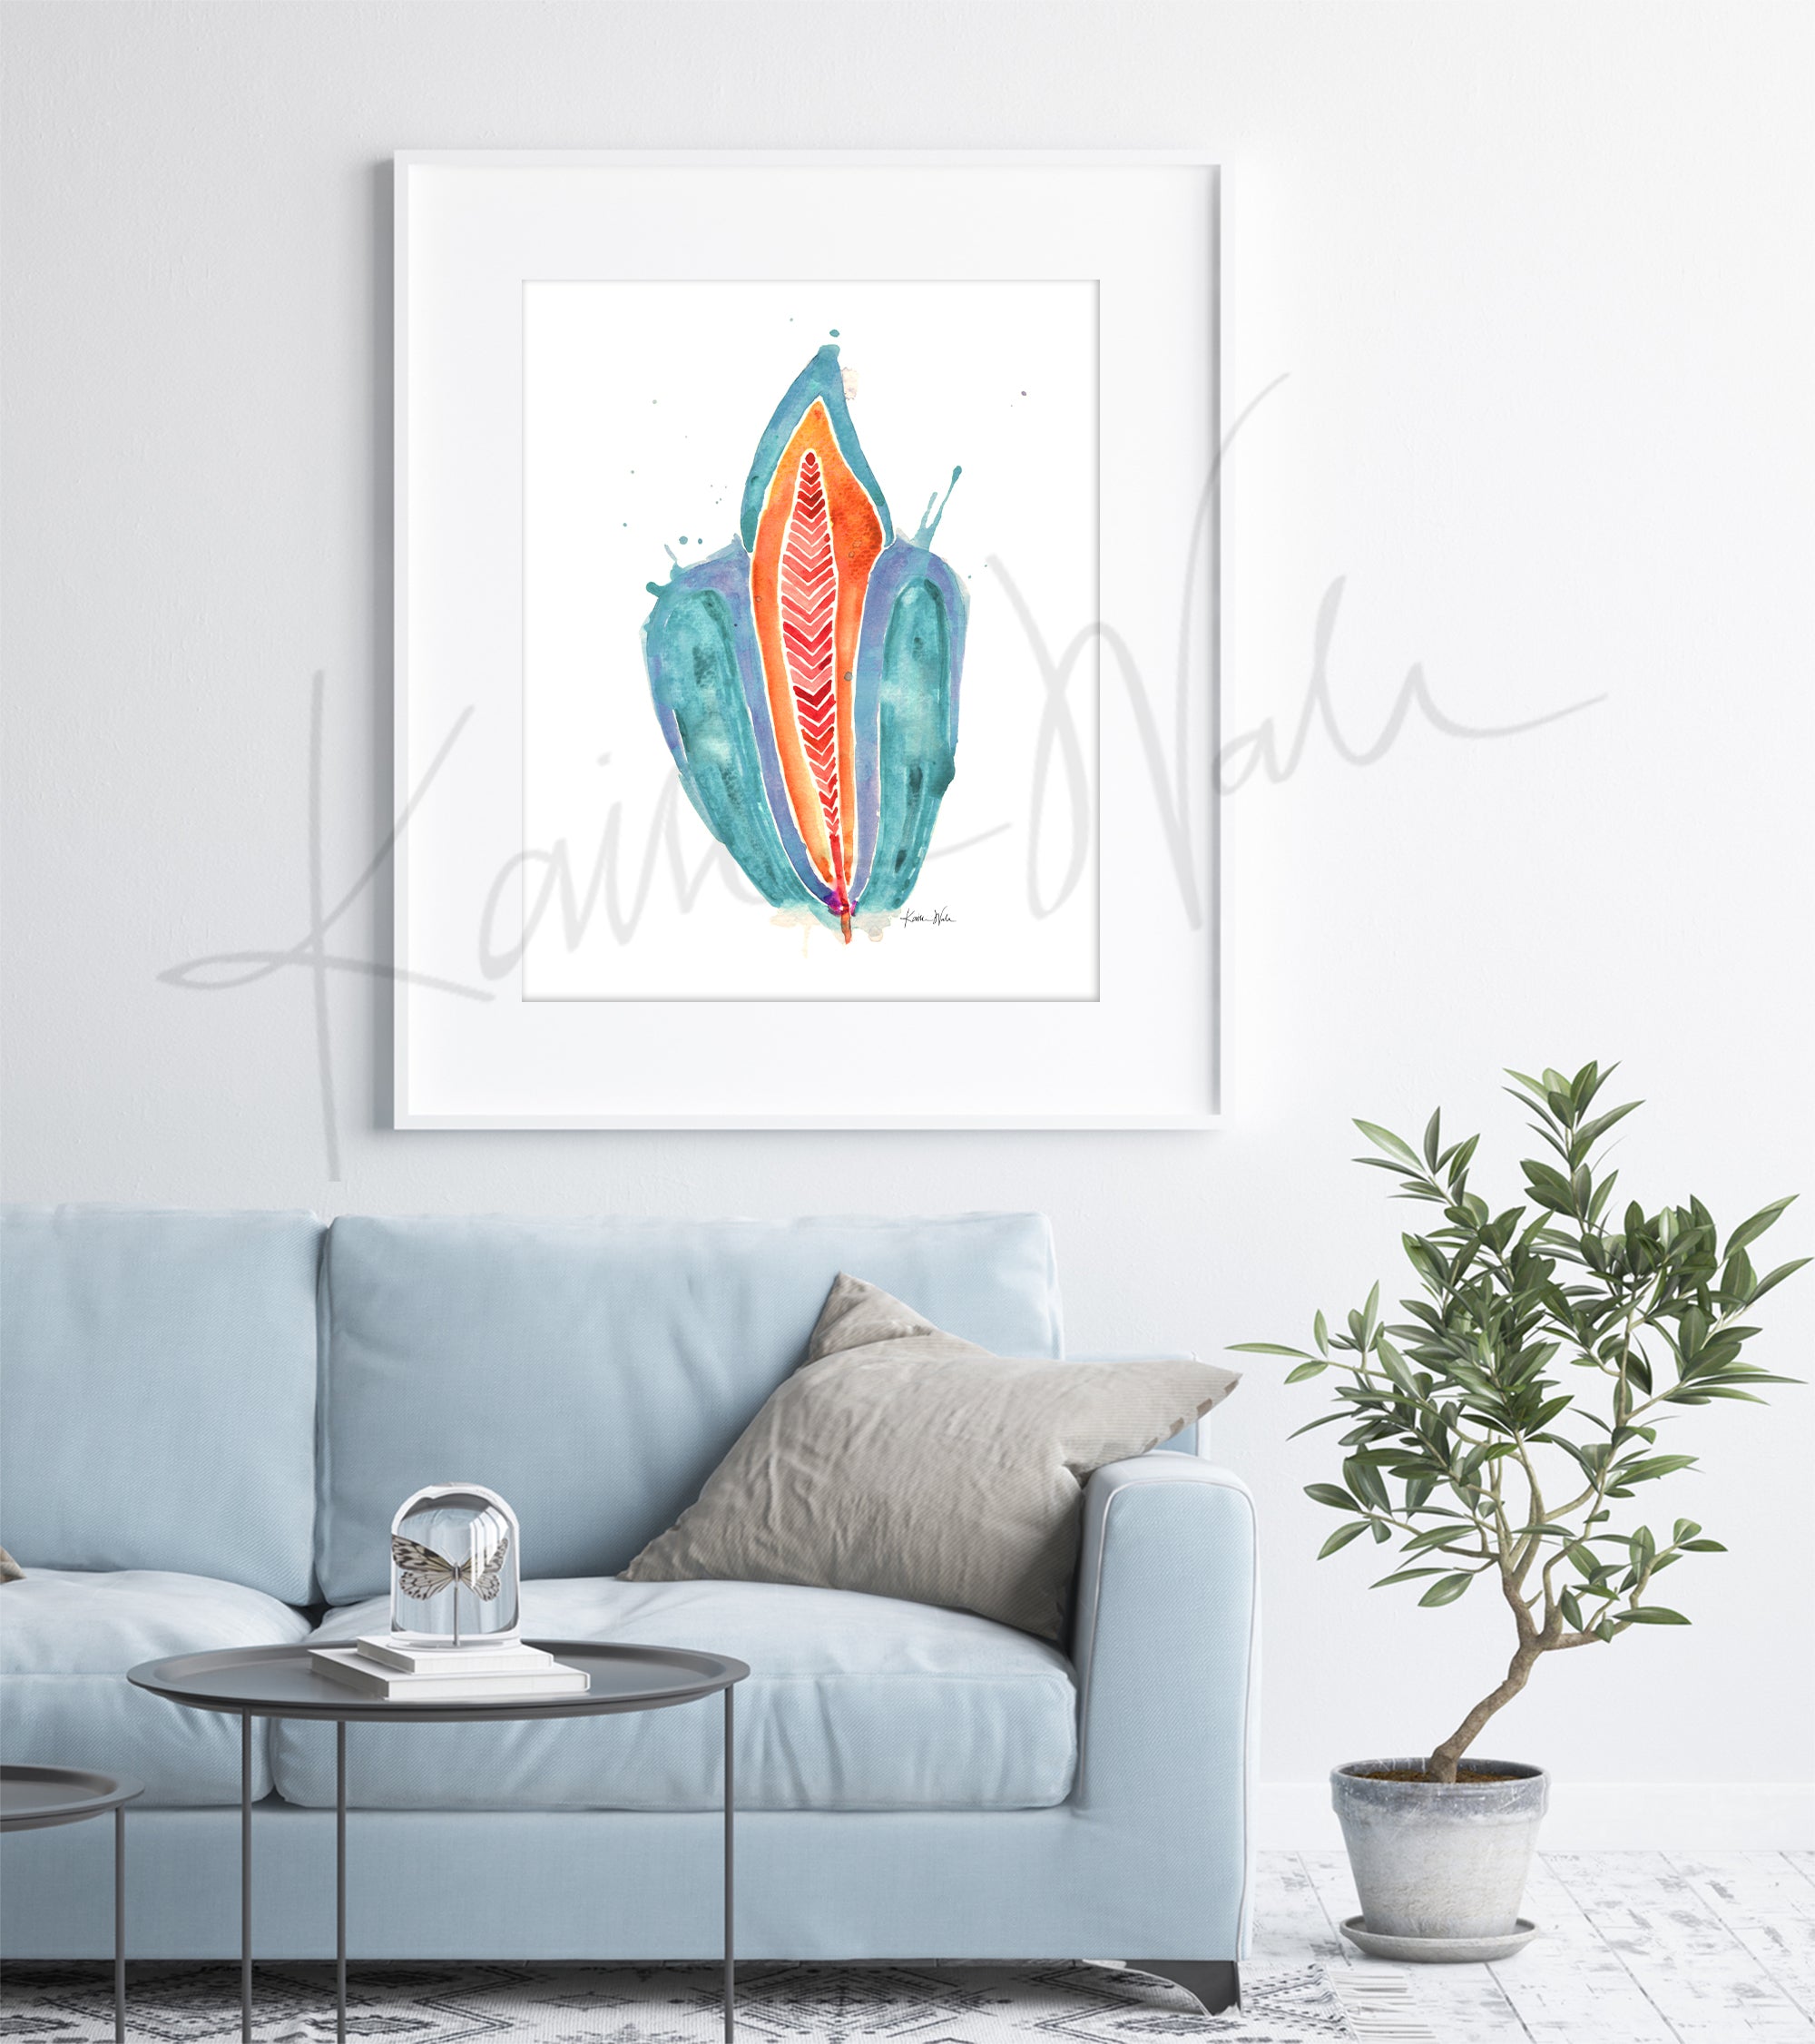 Framed watercolor painting of an abstract incisor in teal, orange, and red. The painting hangs above a blue couch.